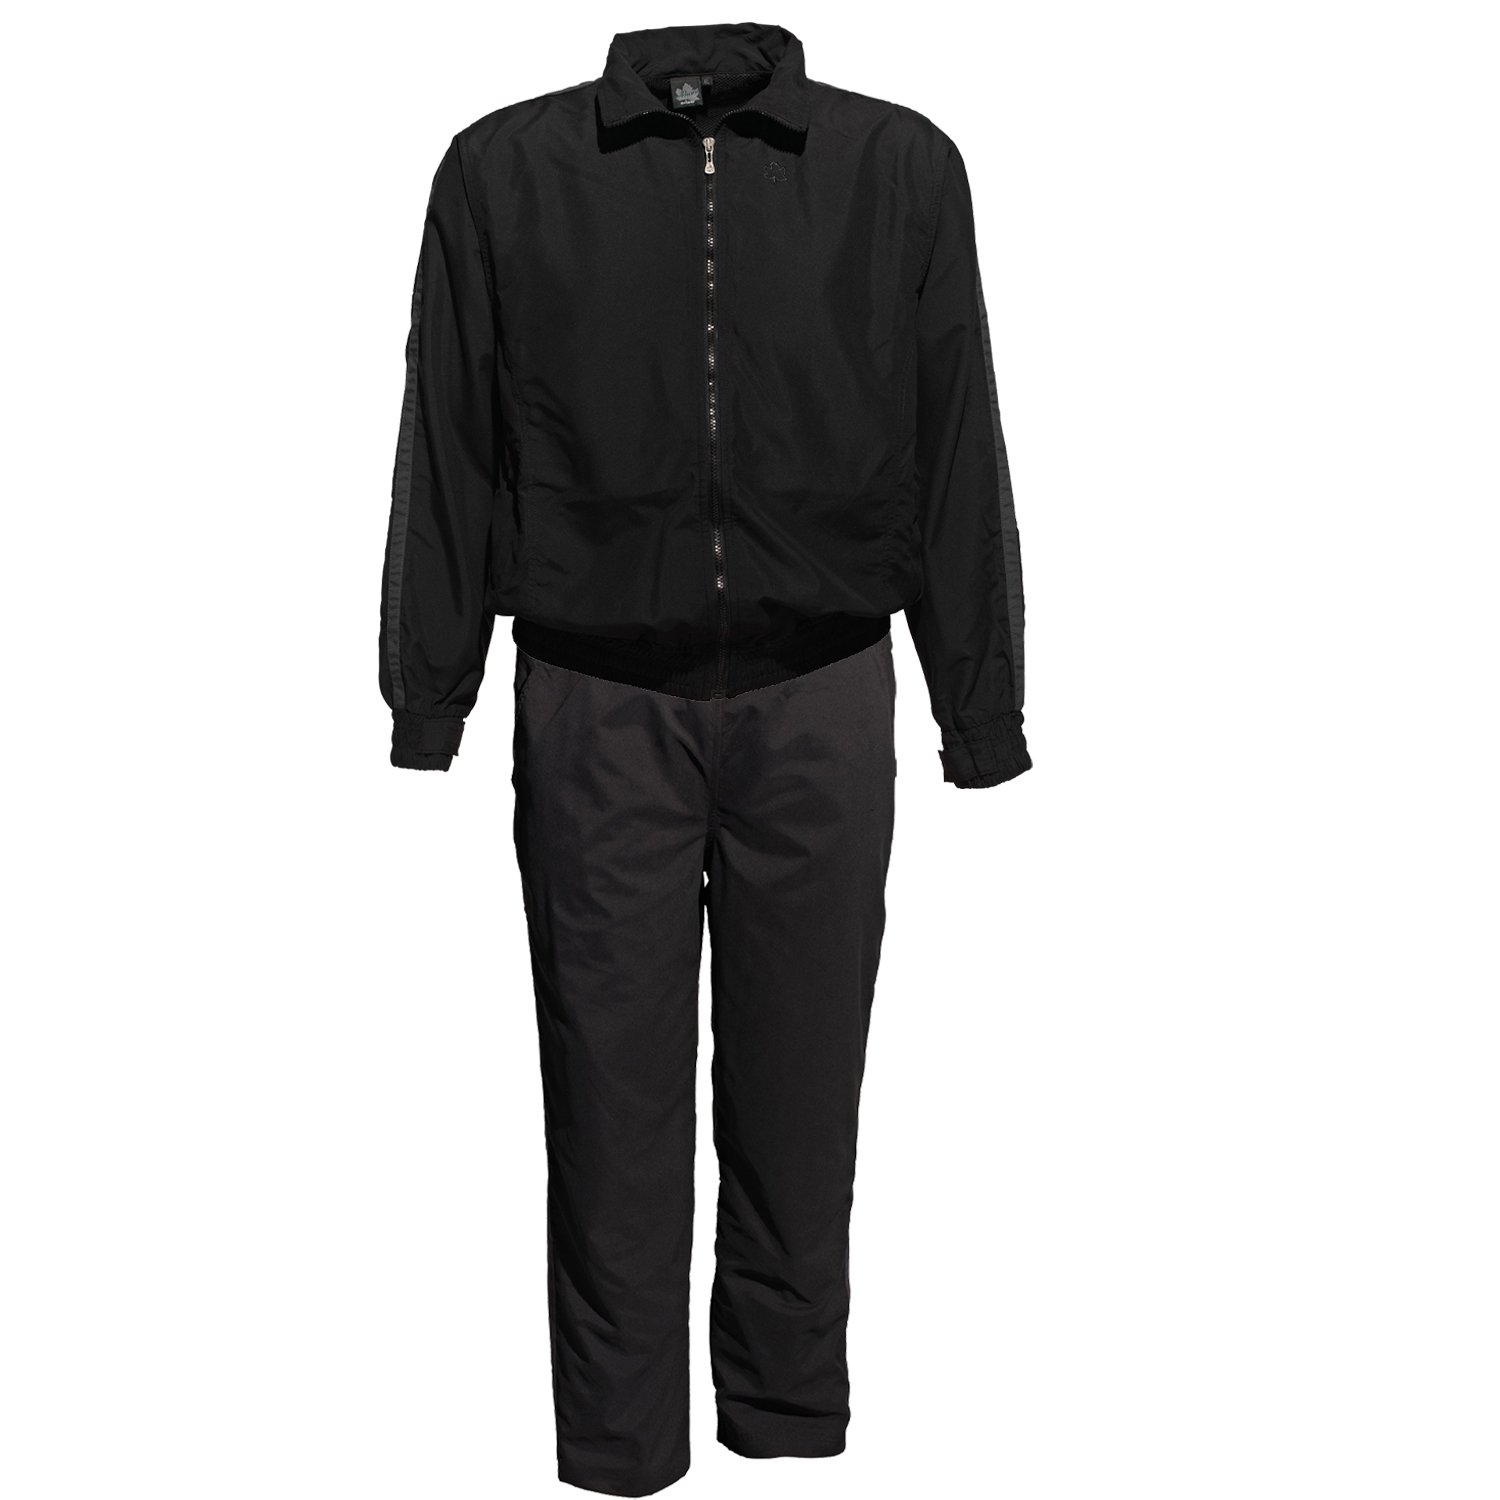 Micro fitness jacket and trousers in black by Ahorn Sportswear up to oversize 10XL